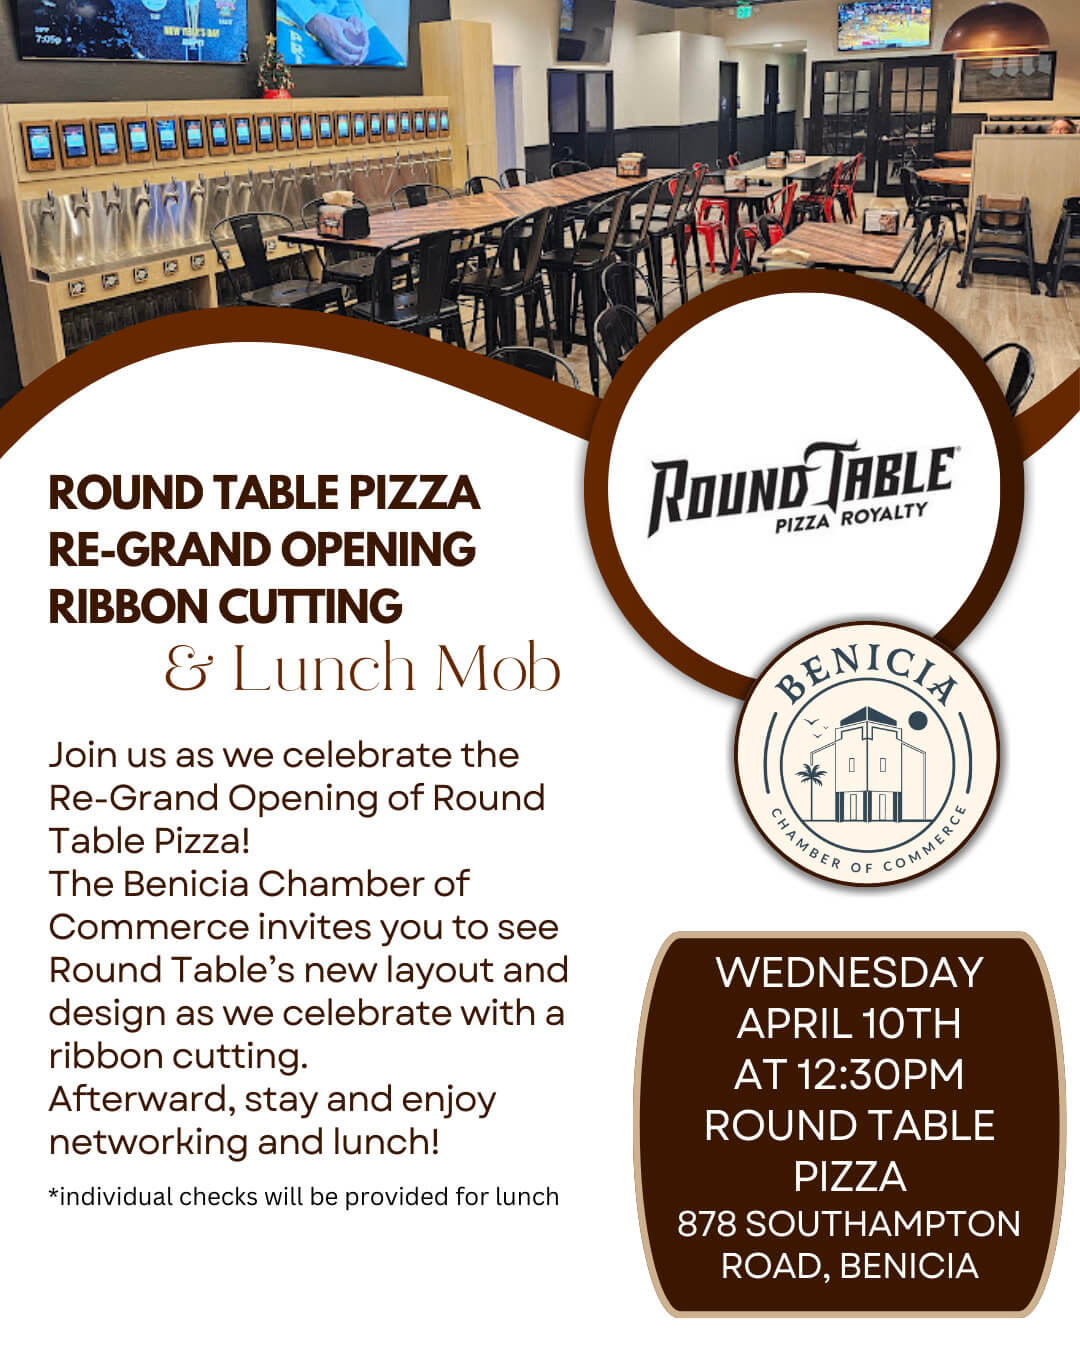 Round Table Pizza Ribbon Cutting